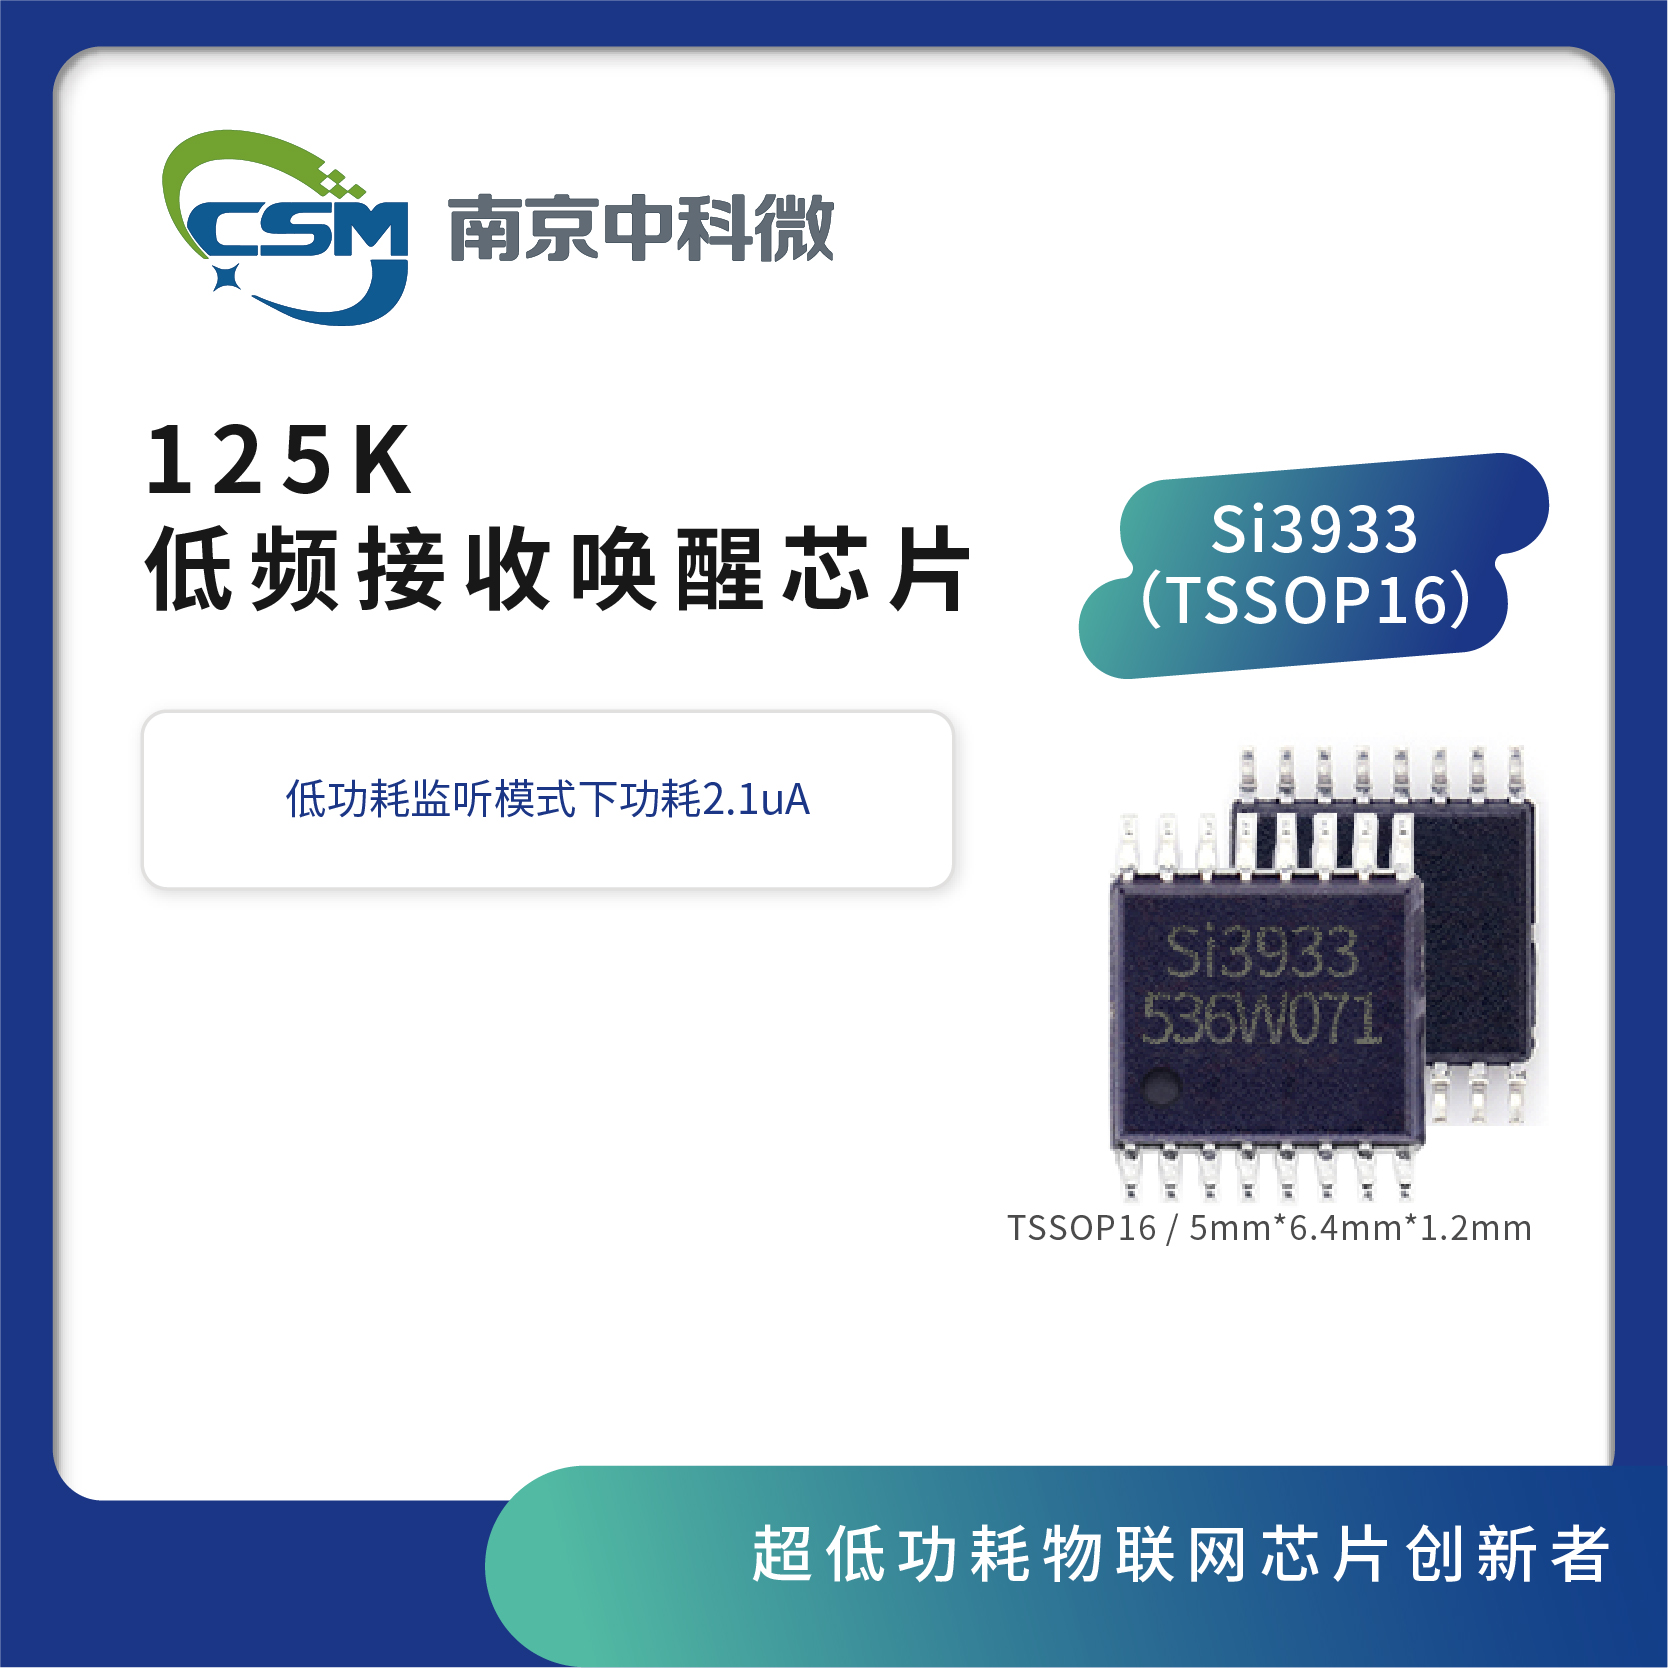 125KHz low-frequency receiving and wake-up chip Si3933(TSSOP16)